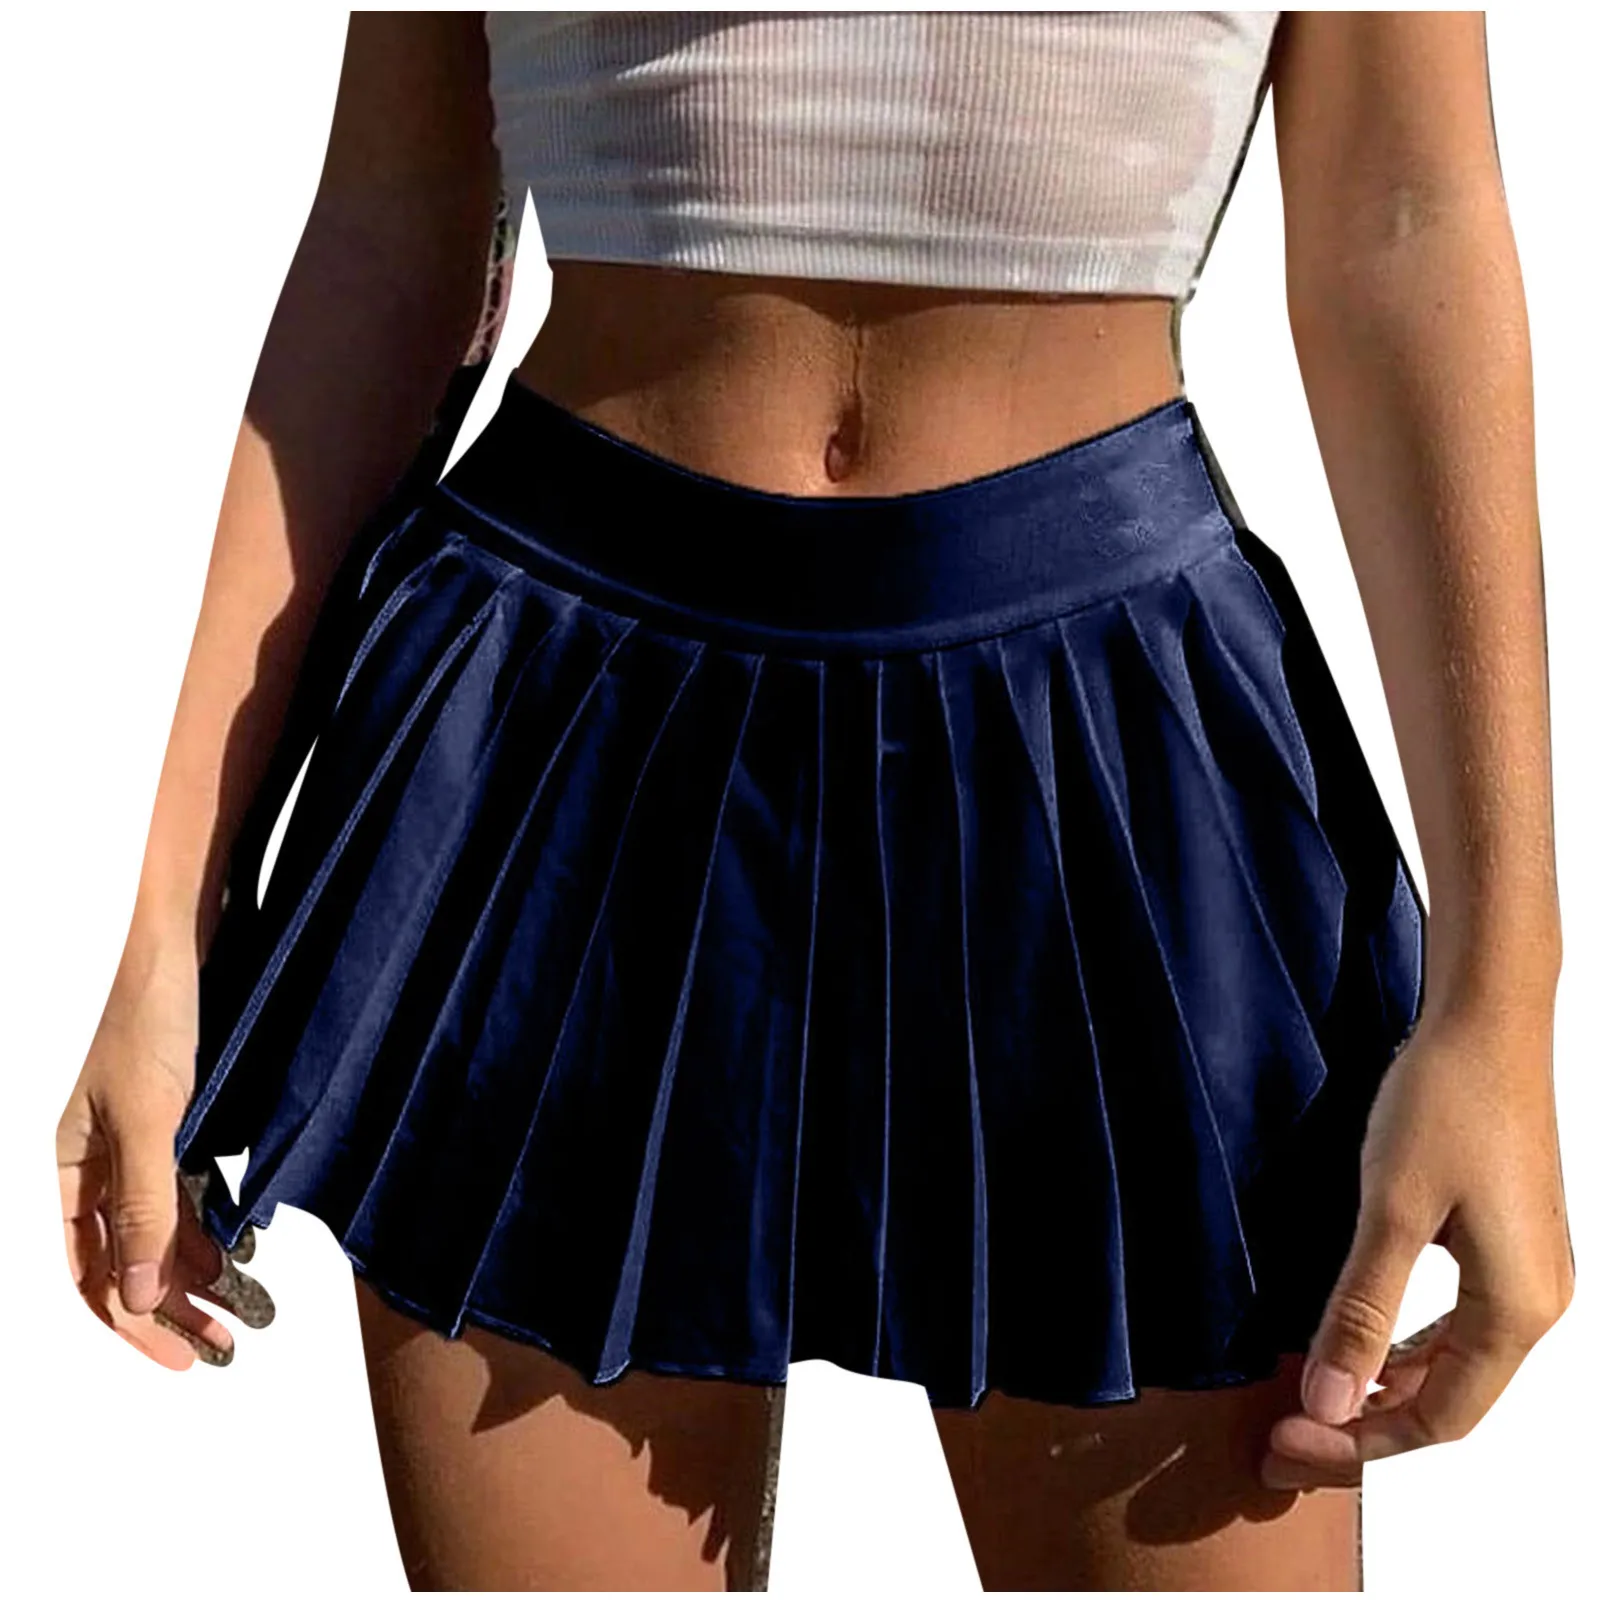 Micro Skirt Pictures